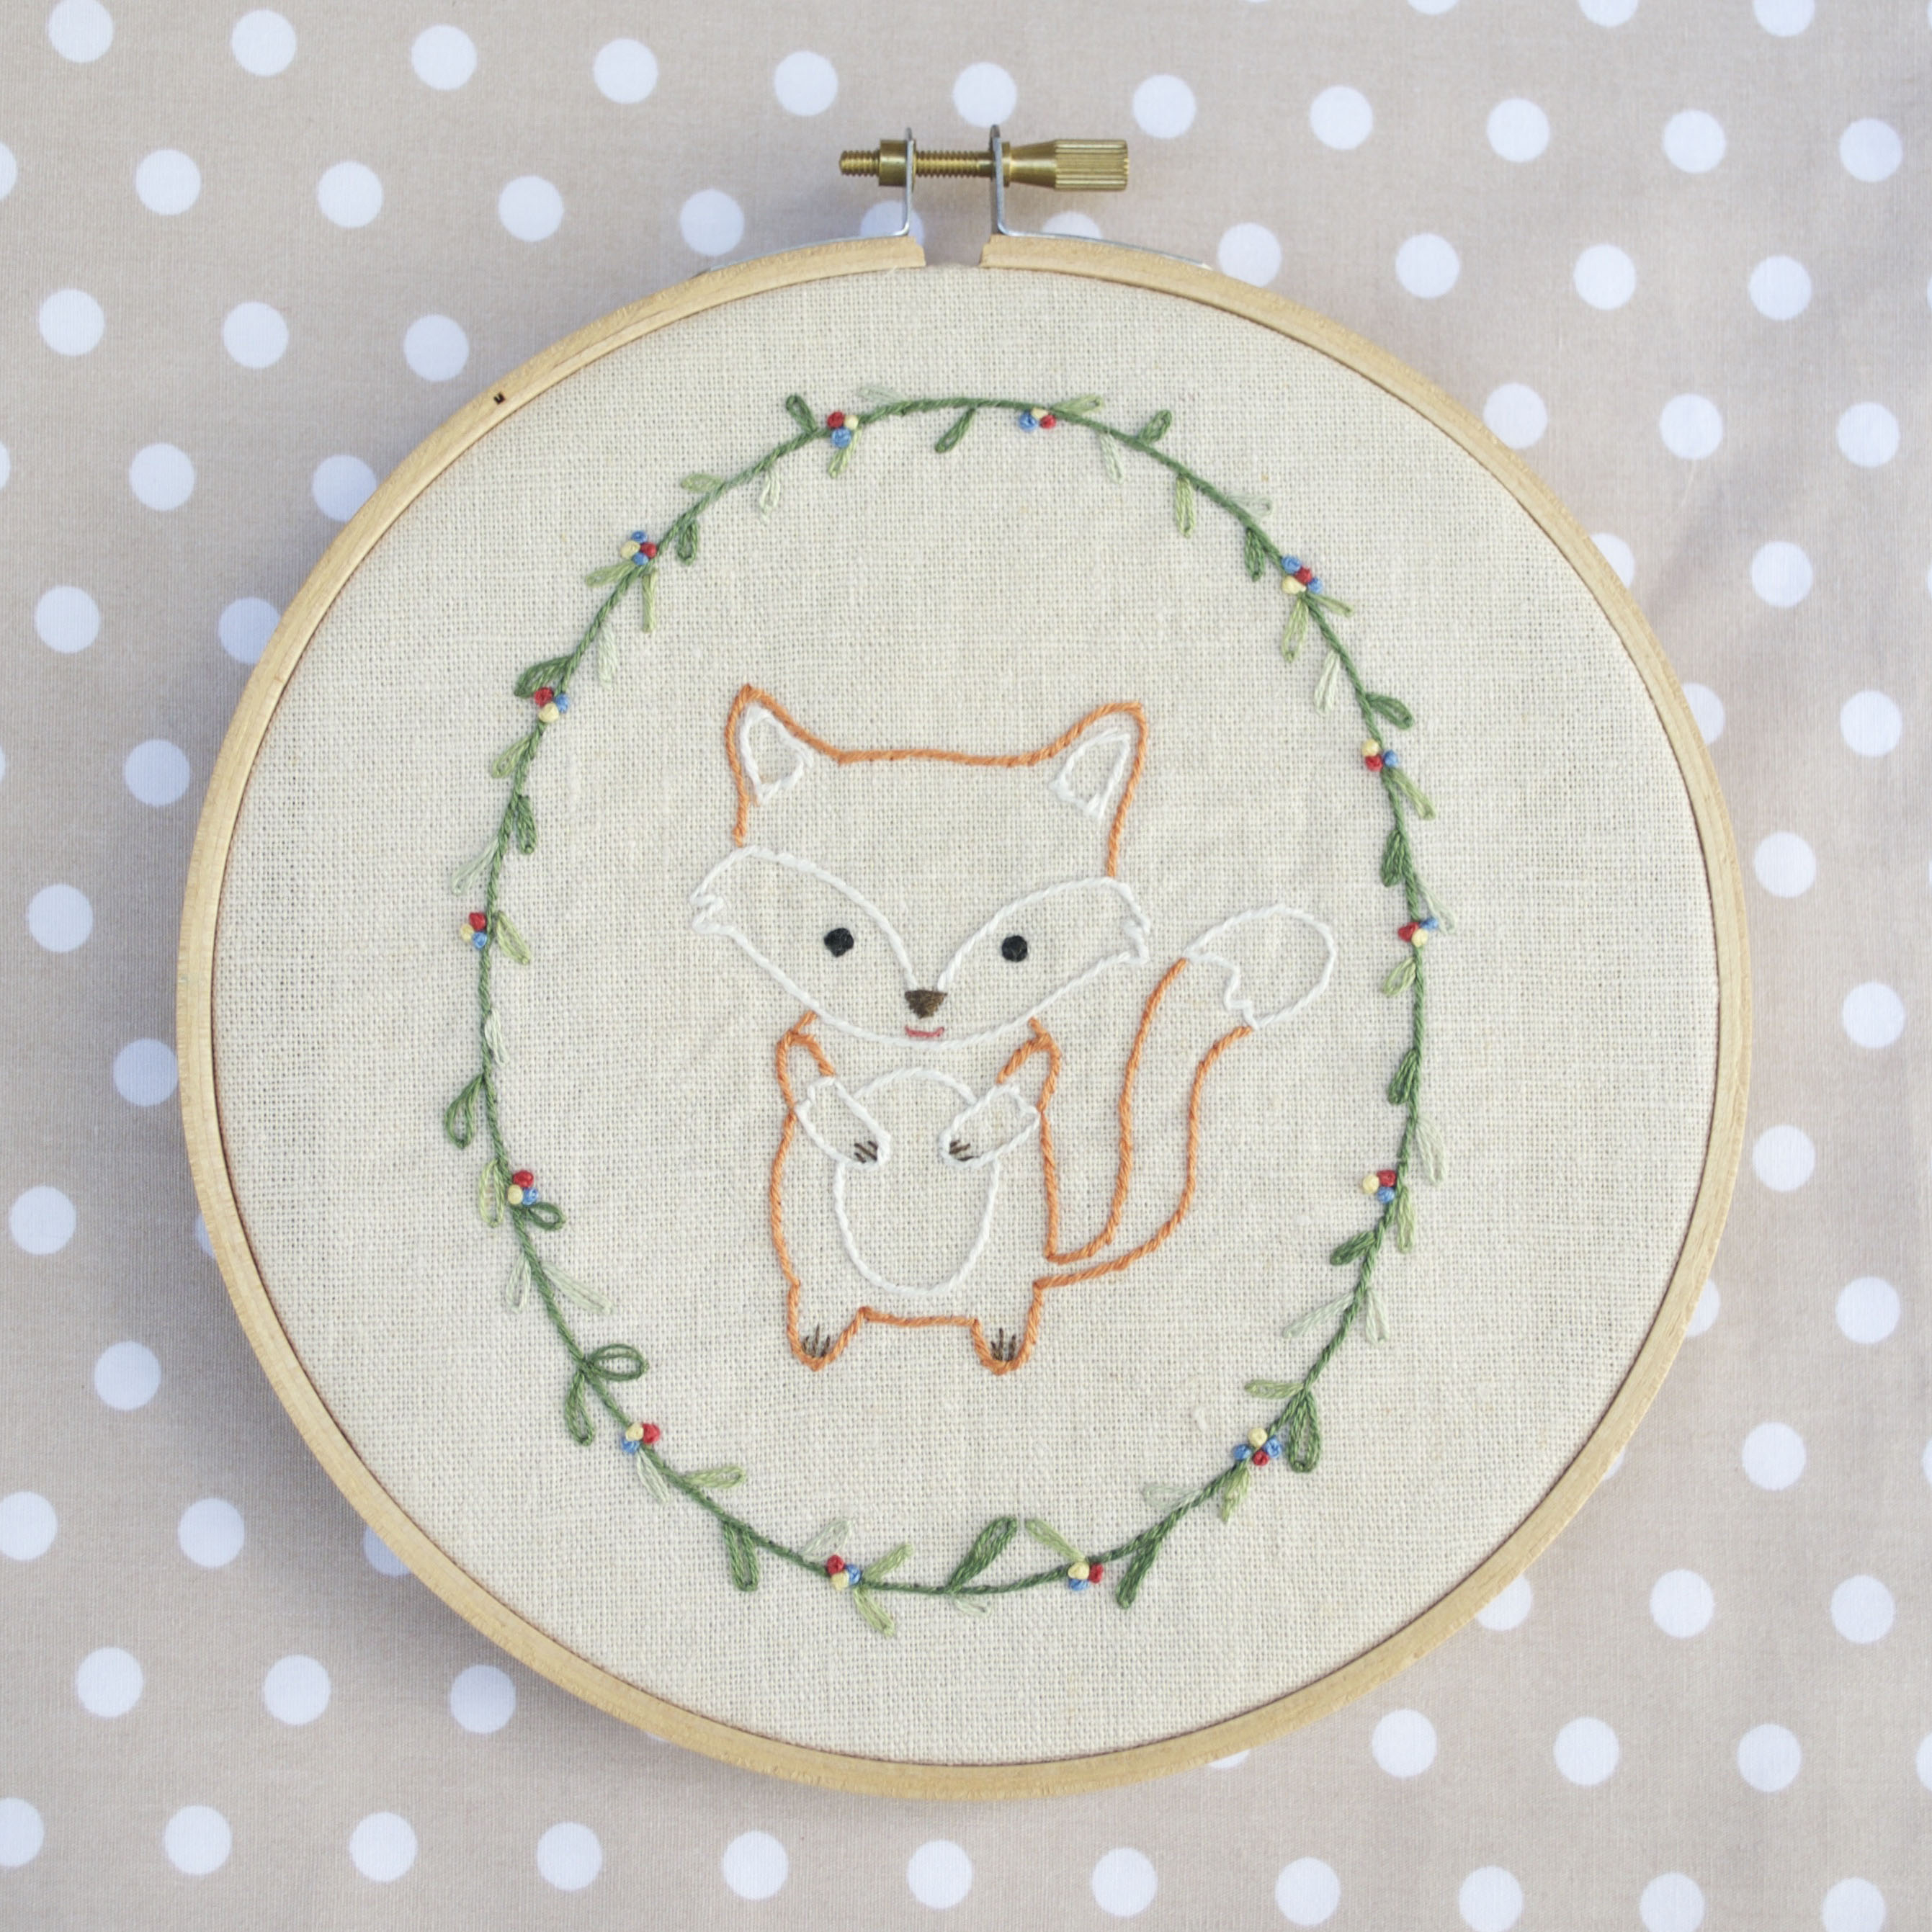 Hand Embroidery Pattern Little Fox Hand Embroidery Pdf Pattern Instructions